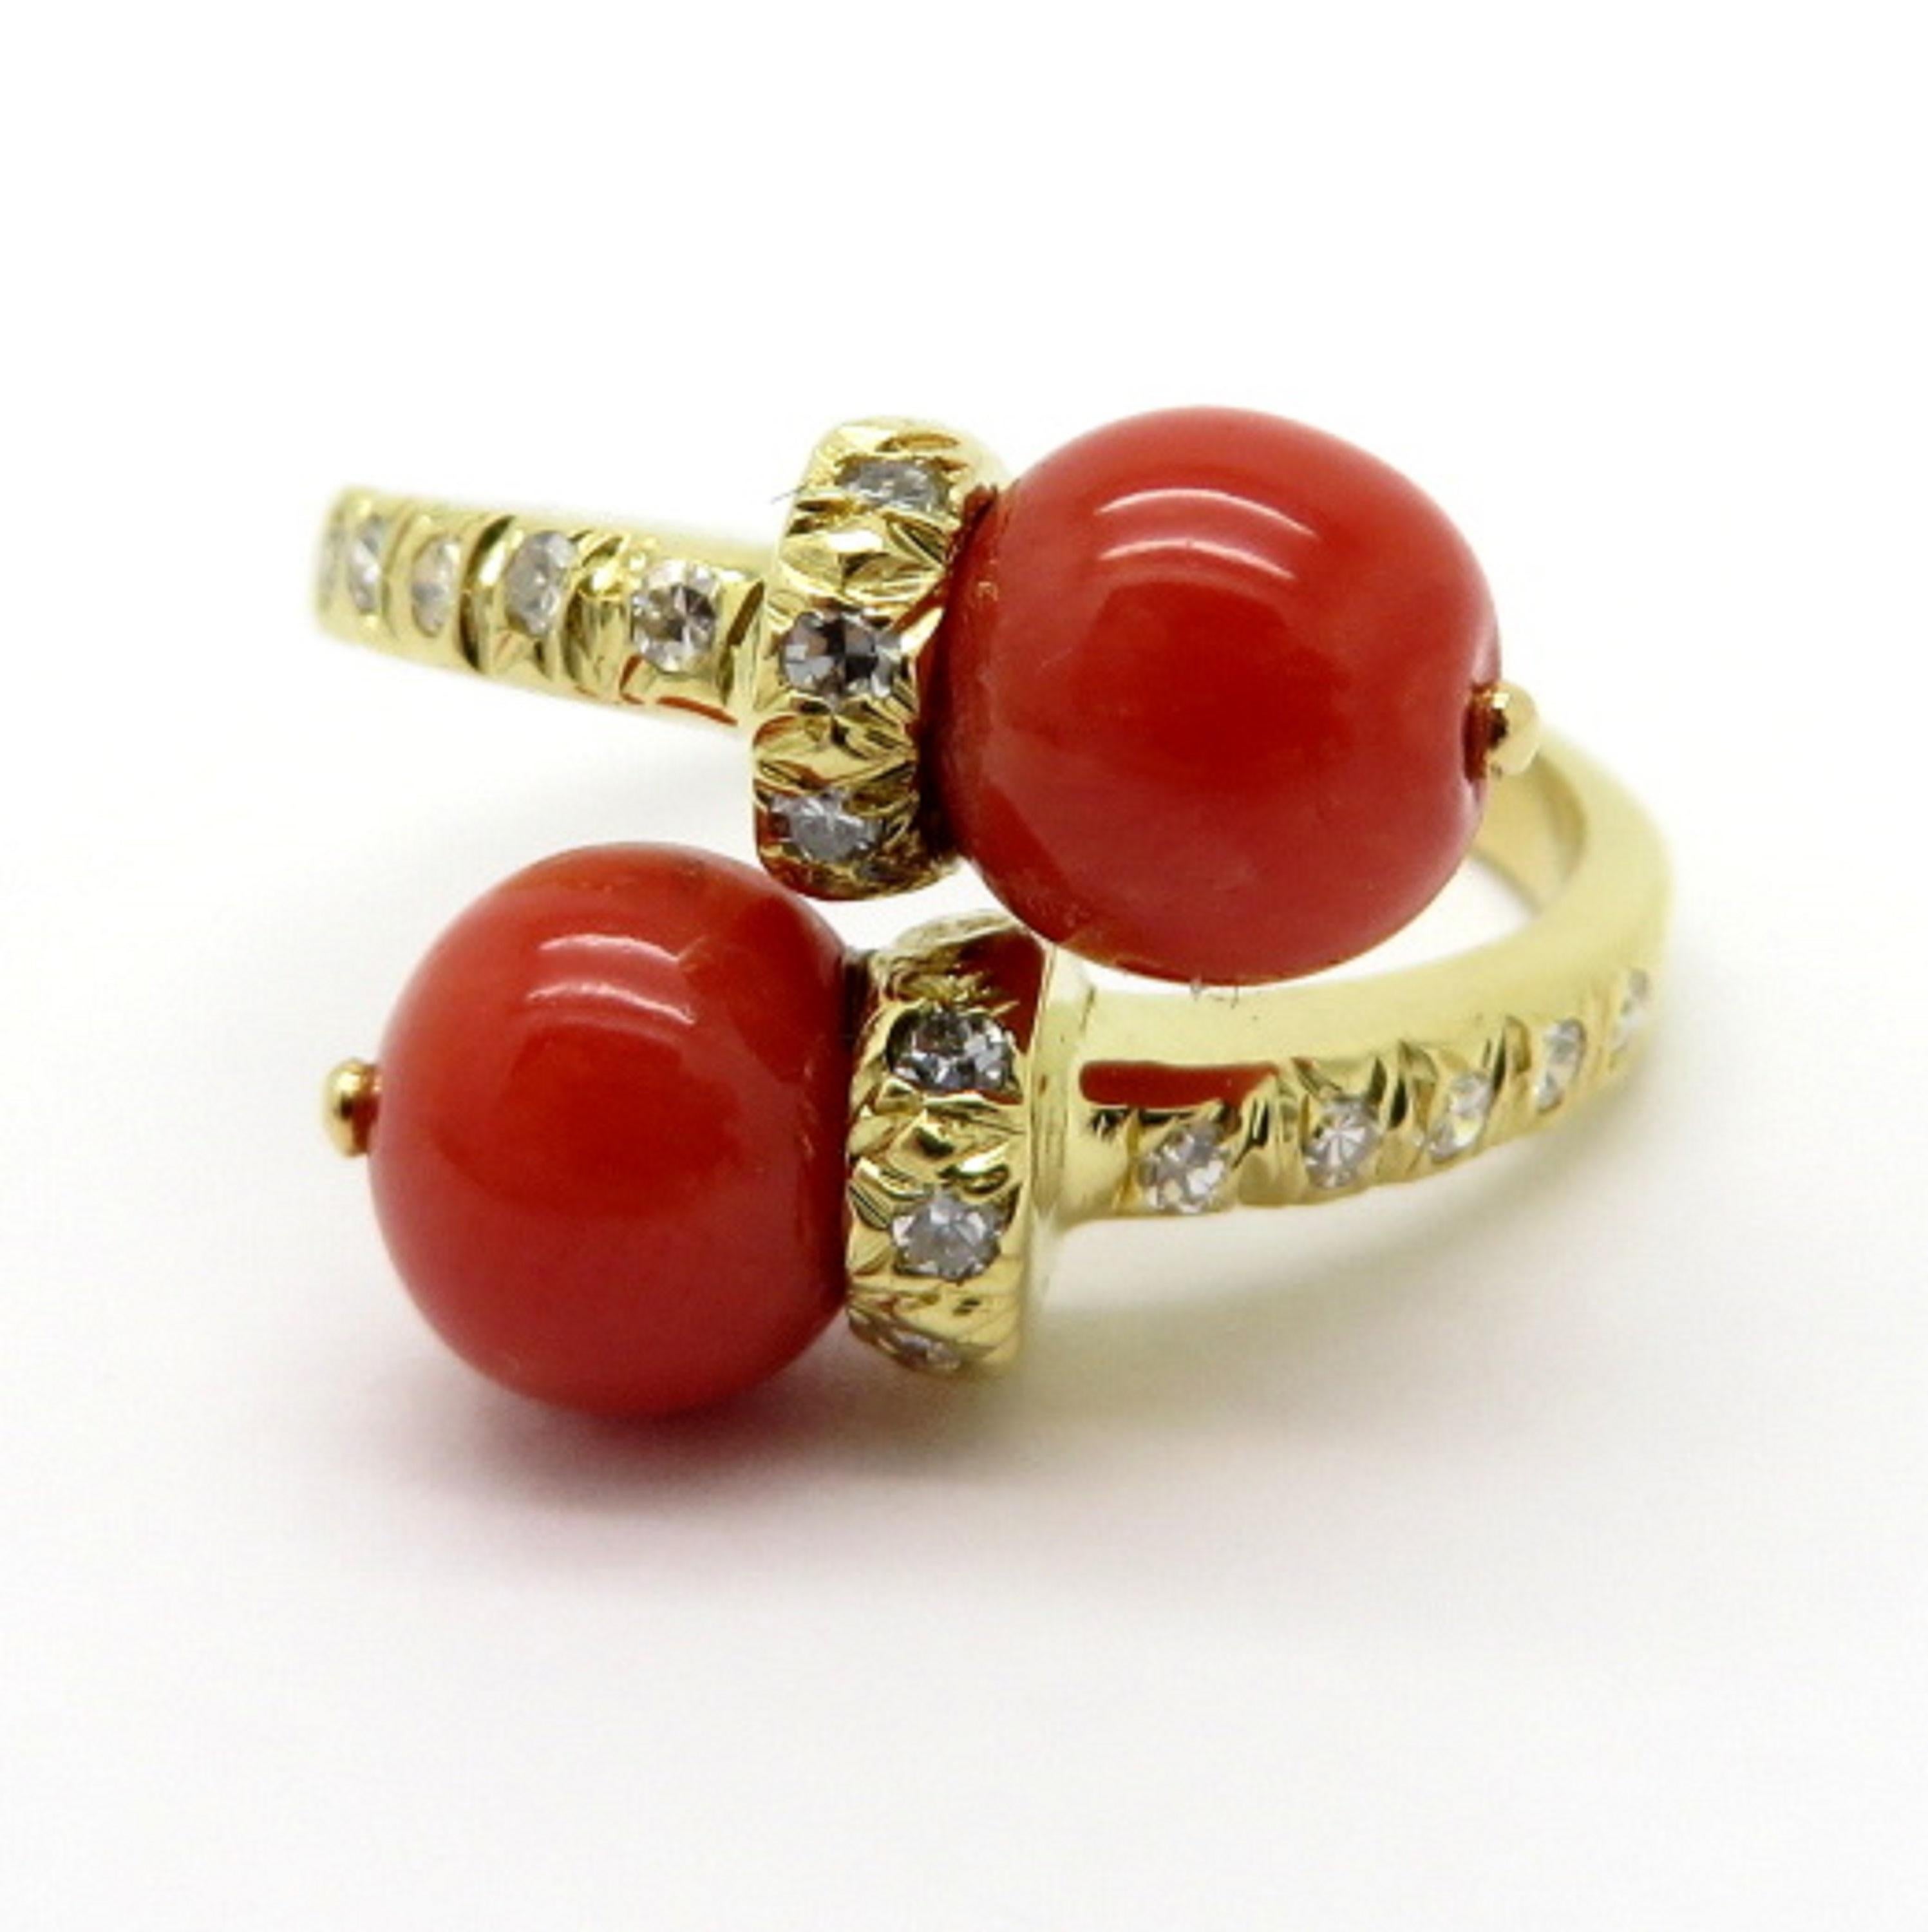 For sale is a beautiful Estate Designer Tiffany & Co 18K Yellow Gold Coral & Diamond Bypass Ring!
Showcasing two round coral beads measuring 6.85 – 7.00 mm each.
Accented by 16 Single Cut diamonds weighing a combined total of 0.15